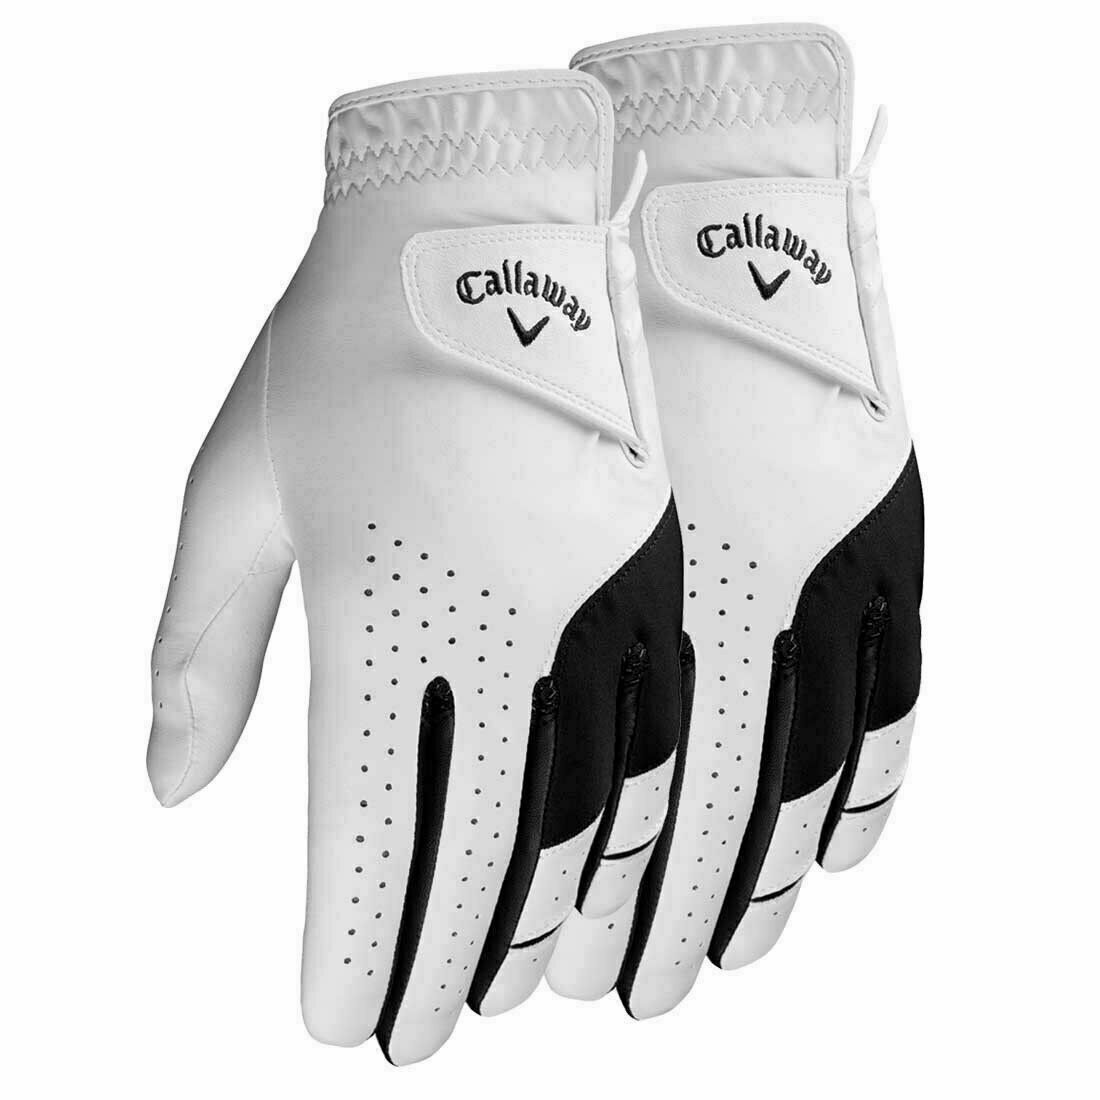 New 2021 Callaway 2-pack Weather Spann Men's Golf Gloves **2-3 Day Free Ship**